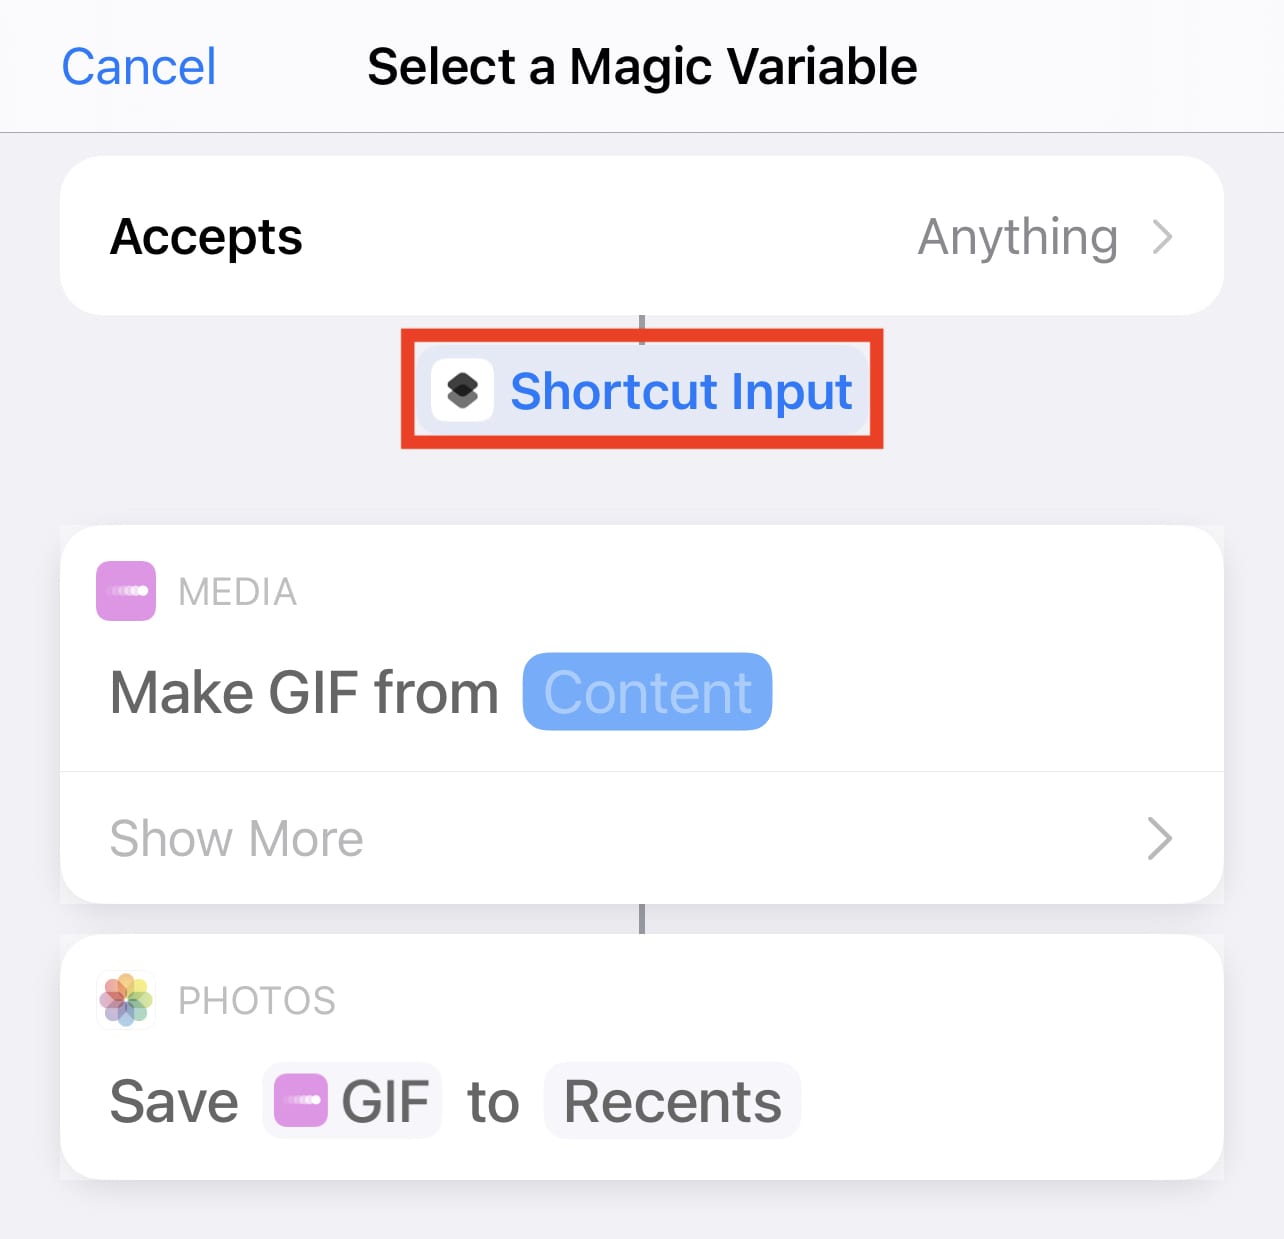 Tap Shortcut Input to pass the video to the GIF conversion function. 